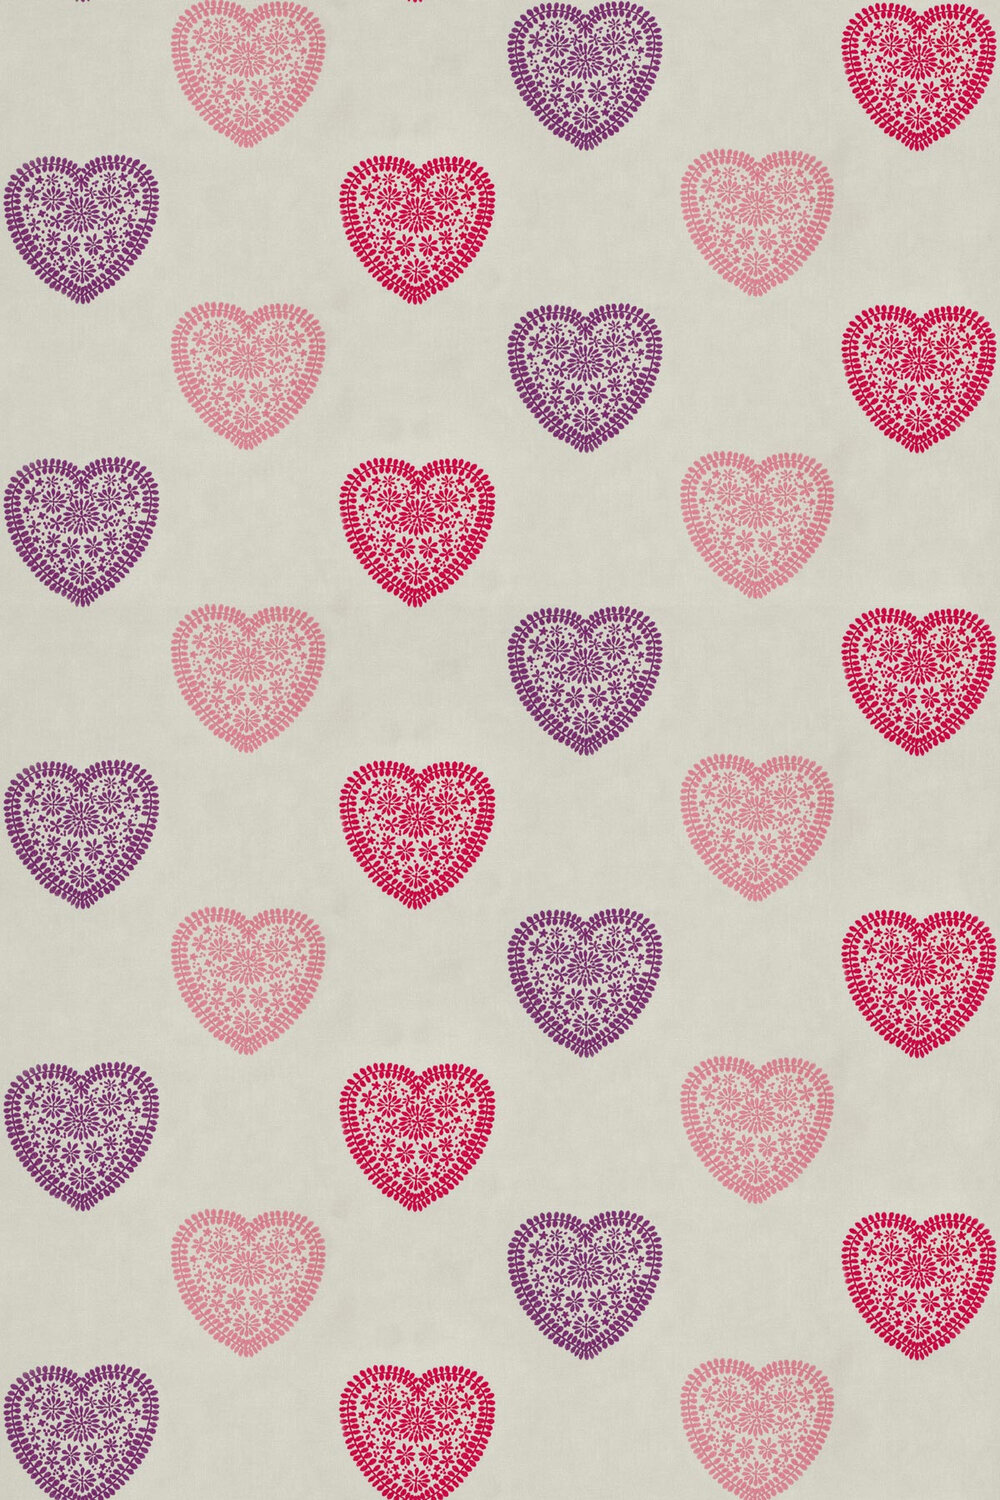 Sweet Heart Fabric - Pink / Cerise / Lavender - by Harlequin